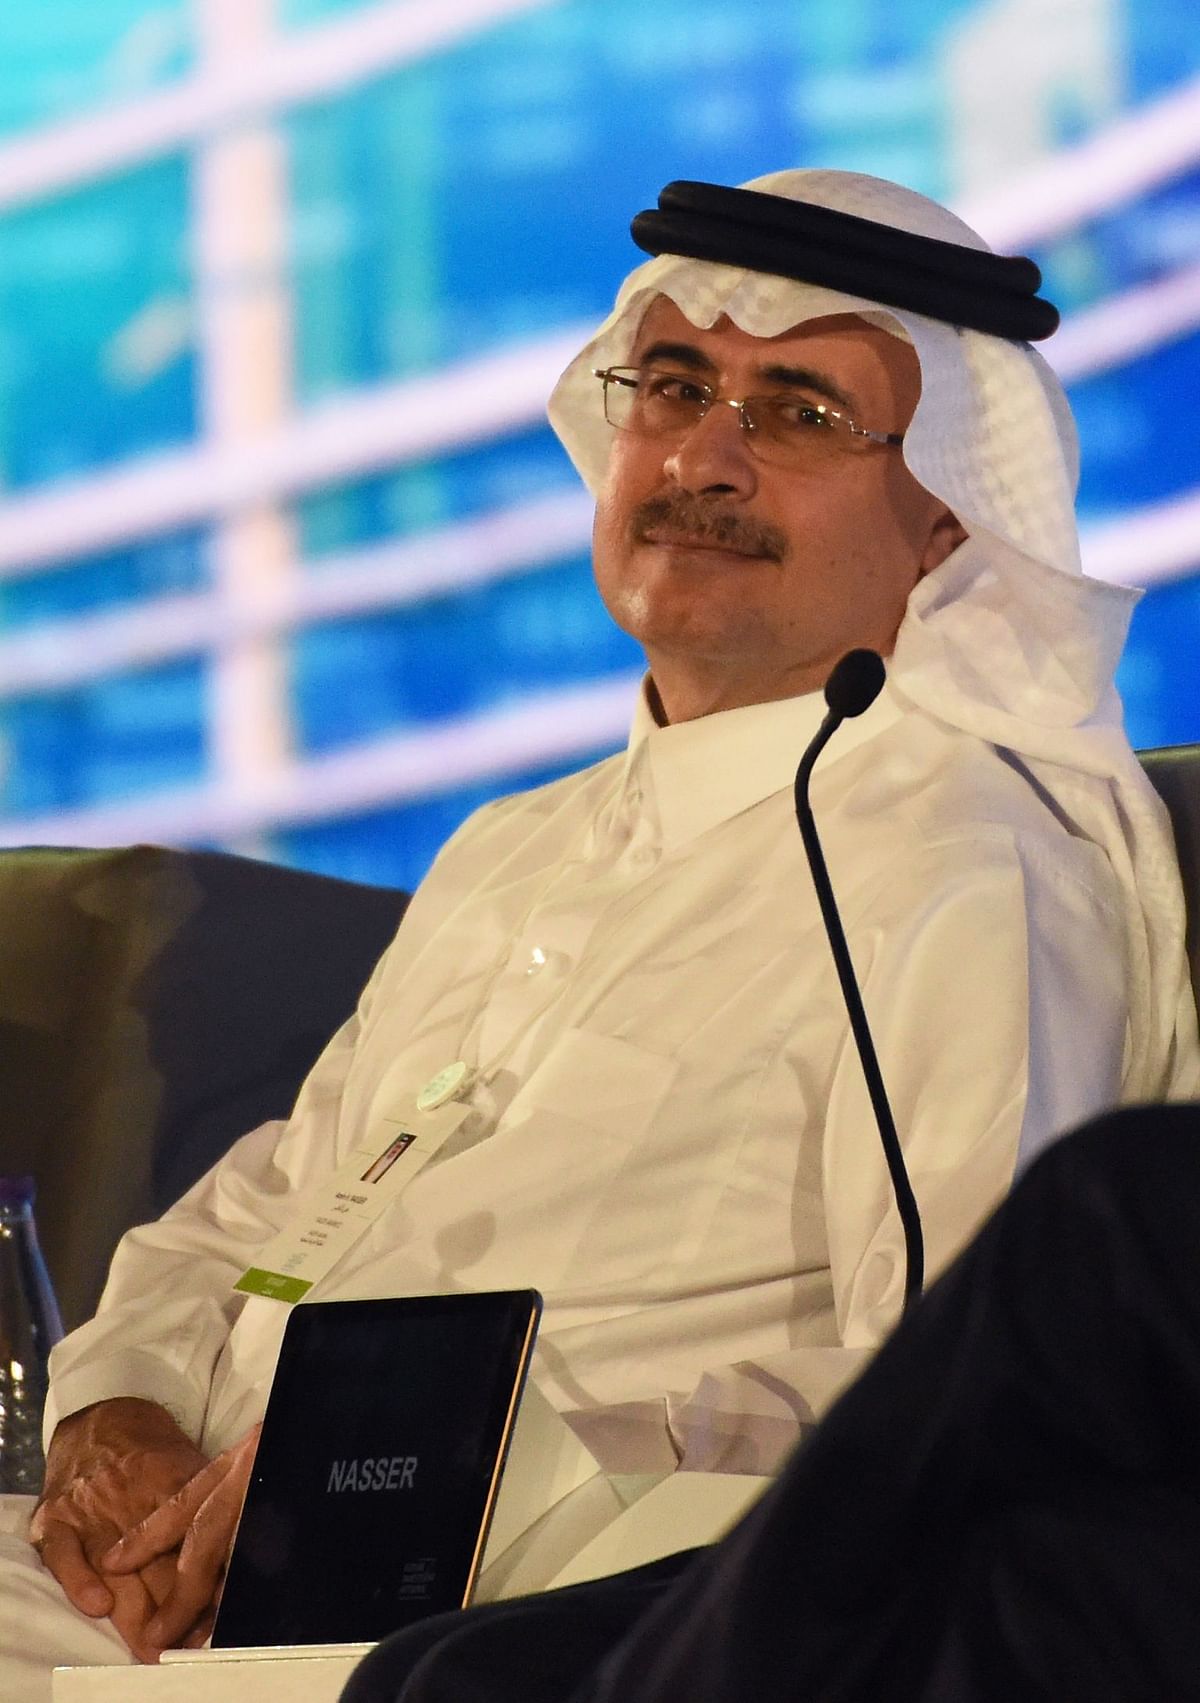 In this file photo taken on 24 October 2017, Amin al-Nasser, chief executive of state oil company Saudi Aramco, looks on during a panel discussion during the Future Investment Initiative (FII) conference in Riyadh. Photo: AFP